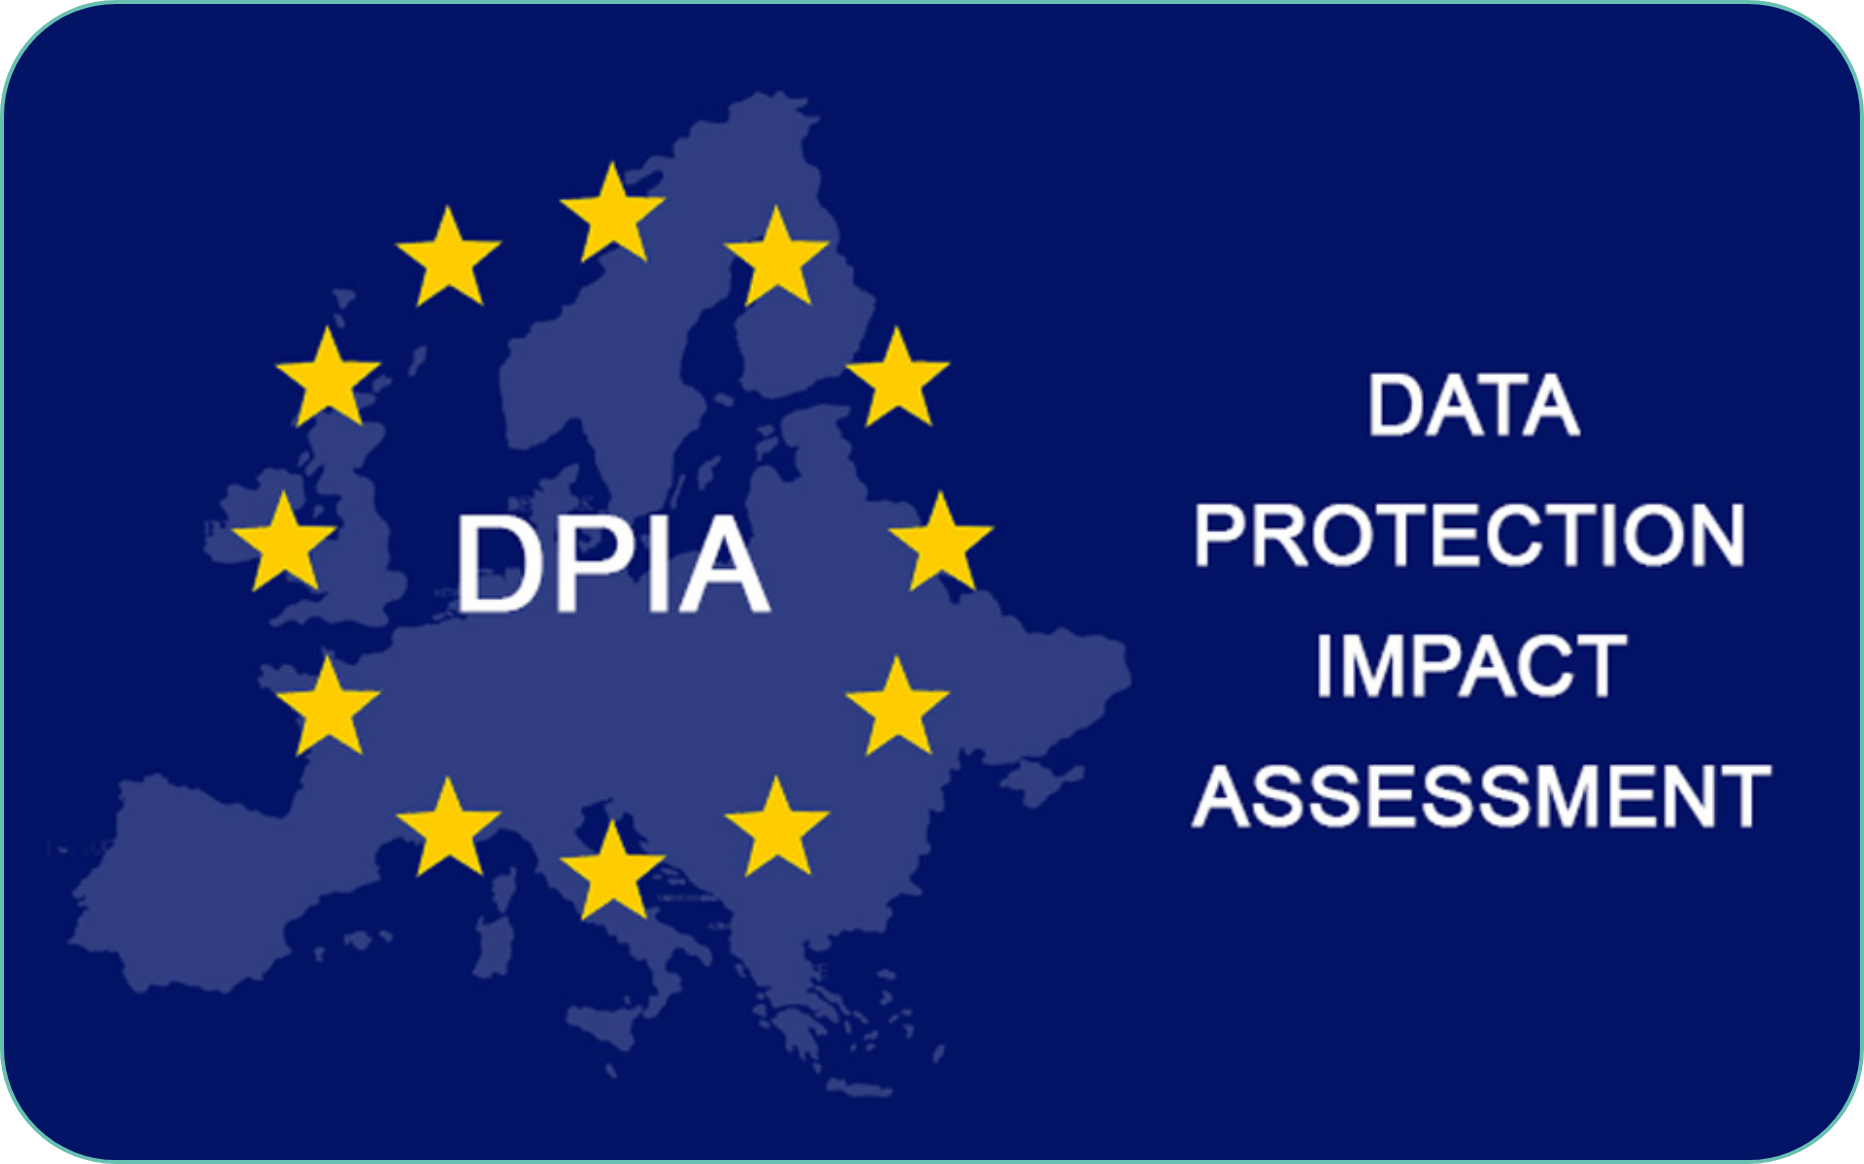 dpia-data-protection-impact-assessment